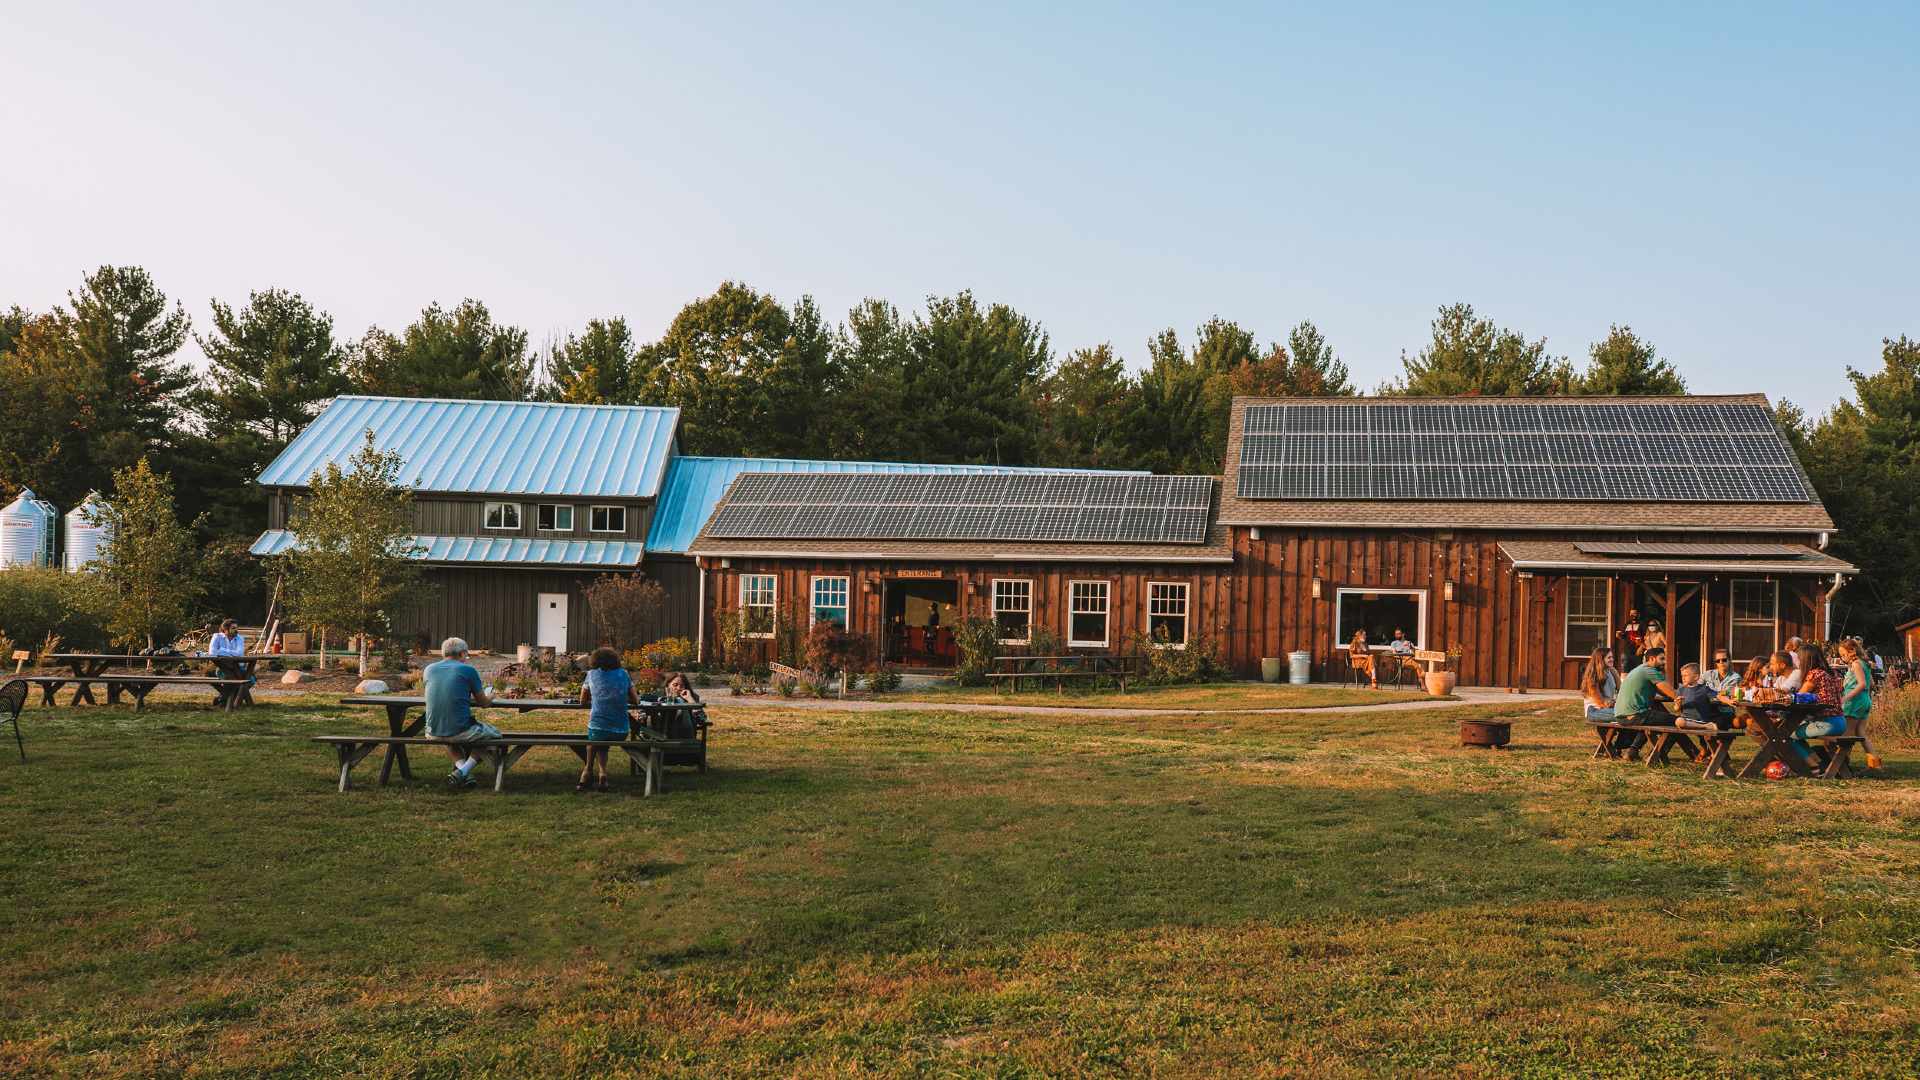 All the First-Rate Food and Drink Stops to Make When You're in Upstate New York